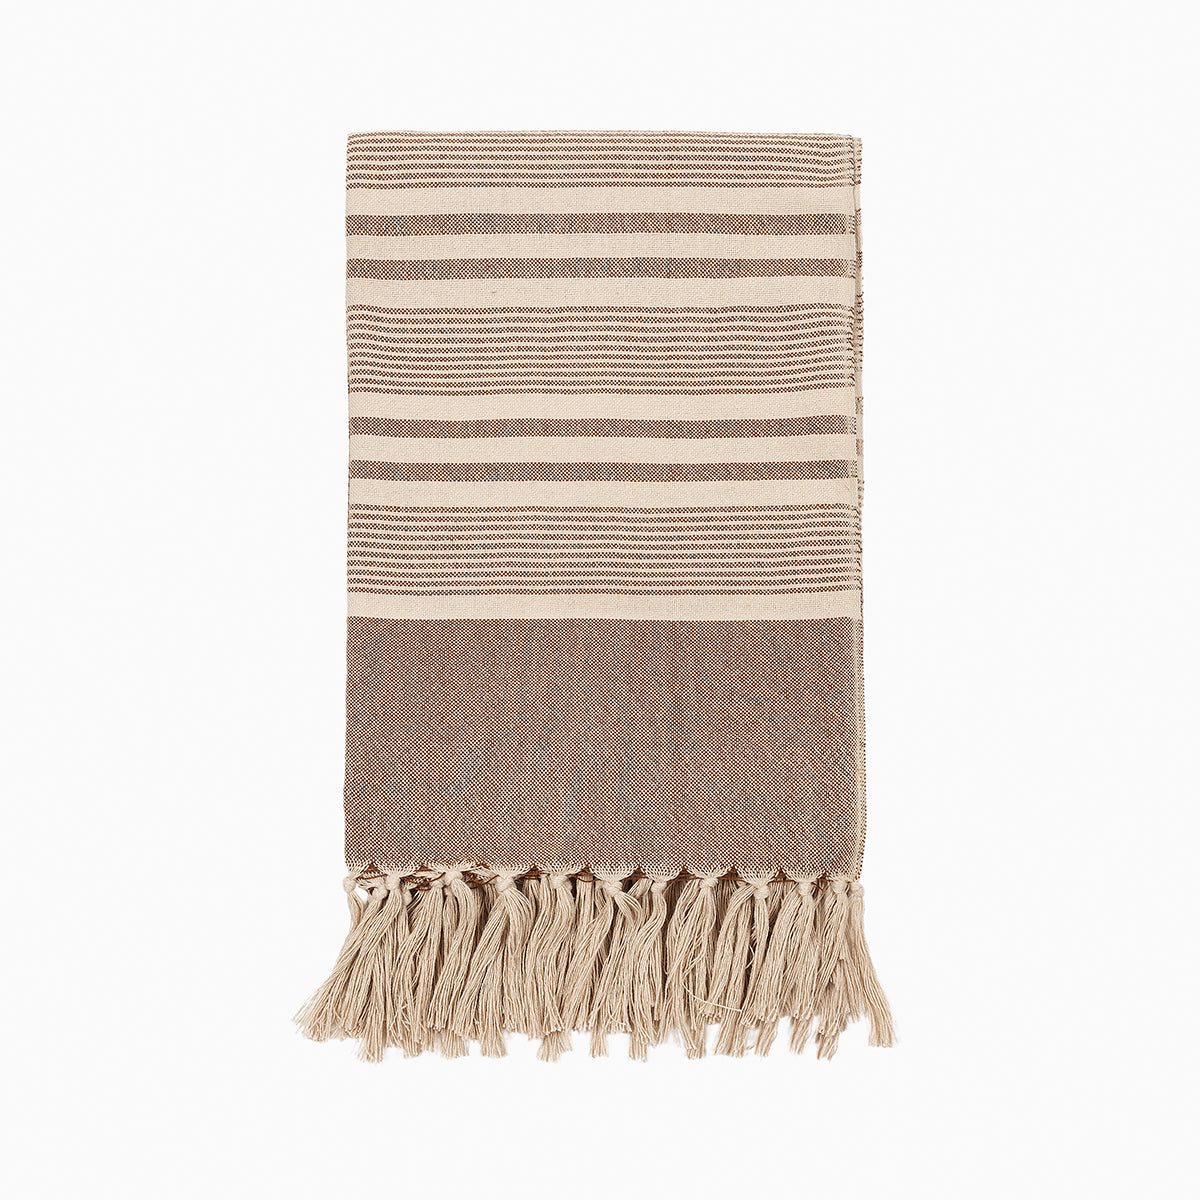 Brown and Beige Outdoor Throw Blanket | Product Image | Uncommon James Home